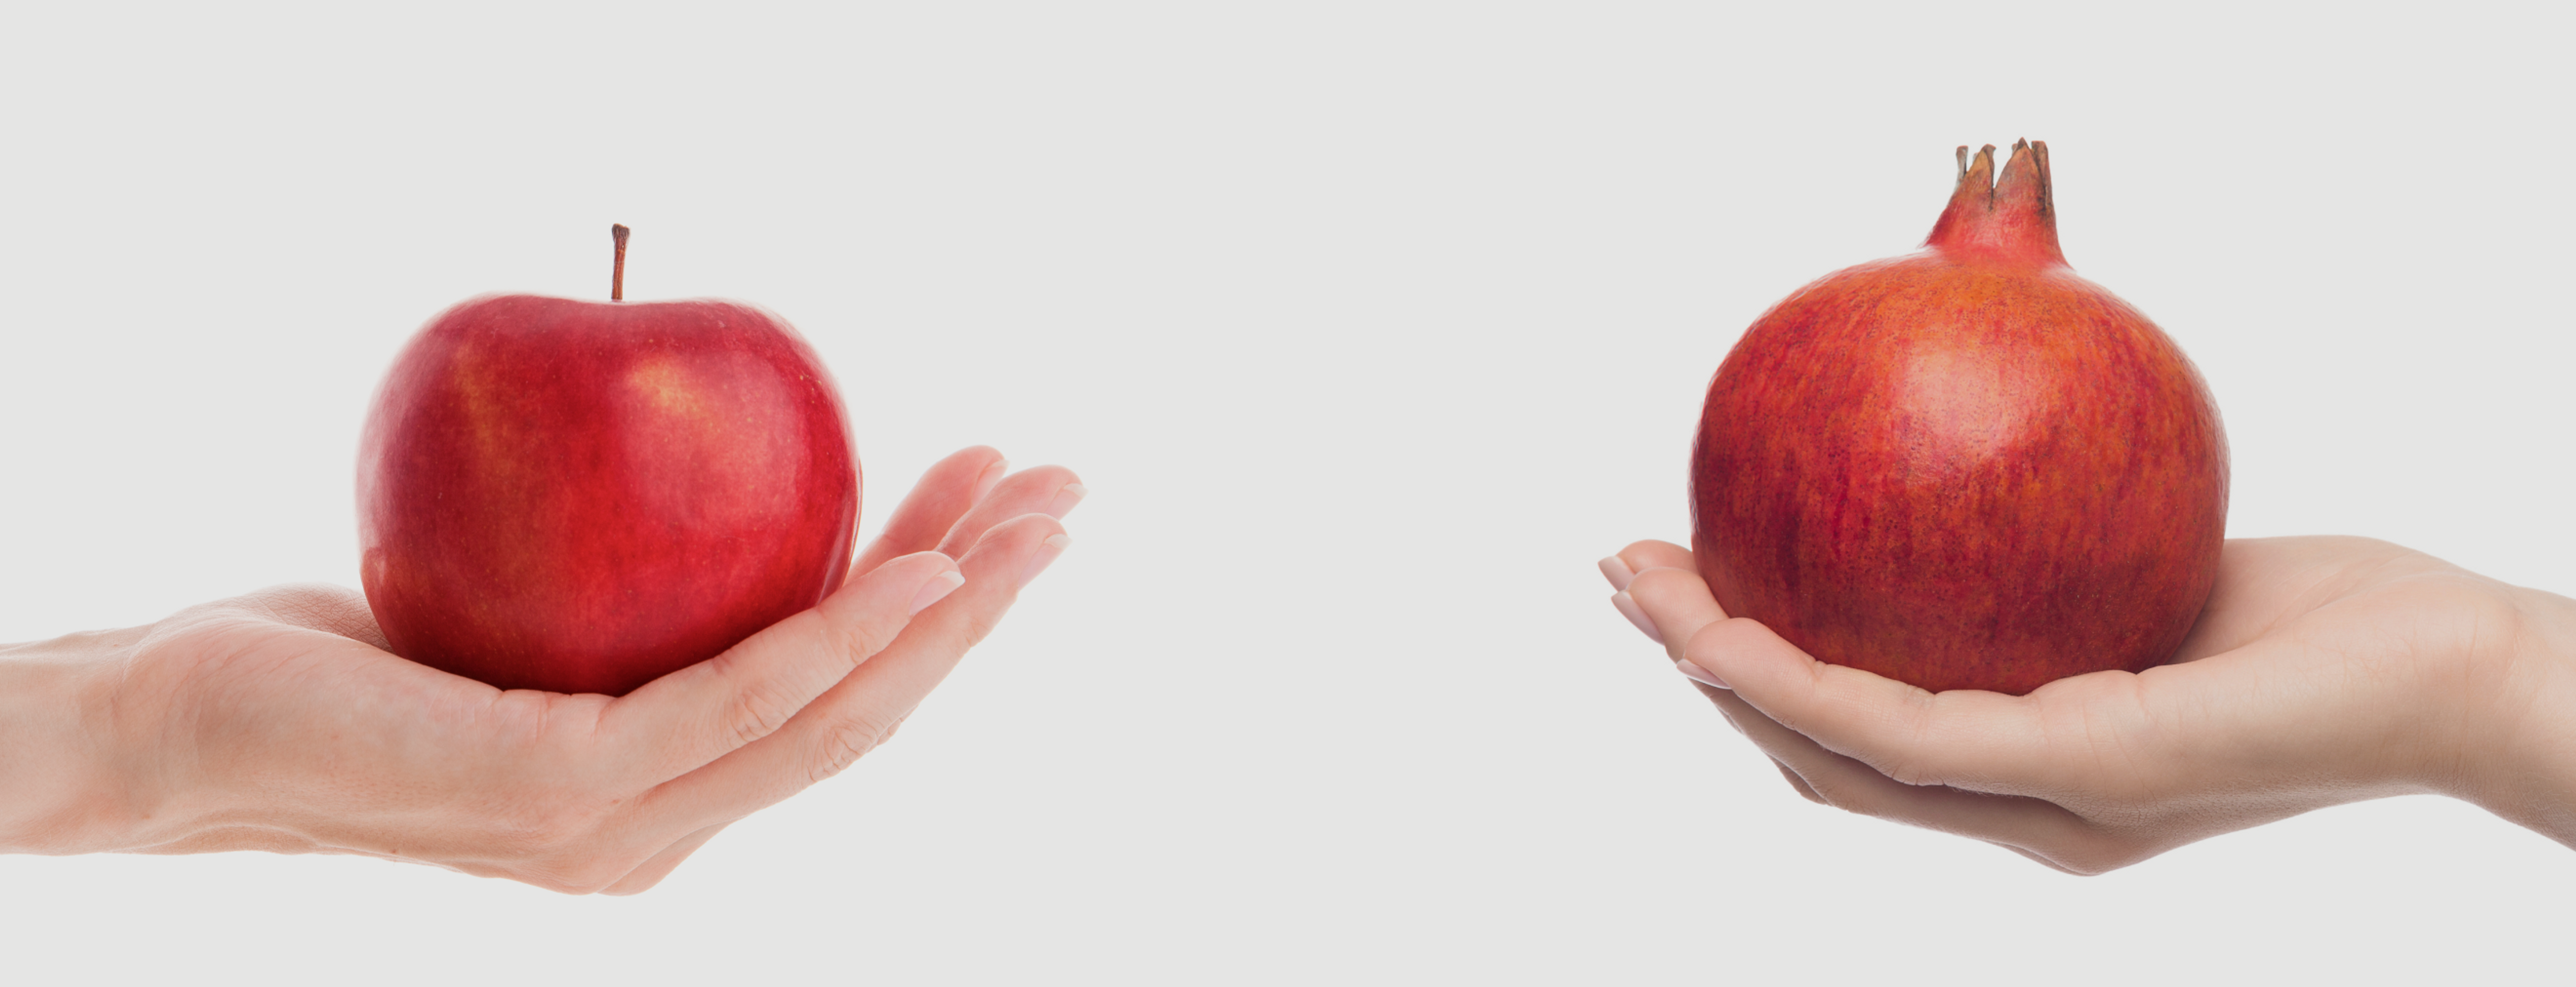 One hand on the left holding an apple, another hand on the right holding a pomegranate.